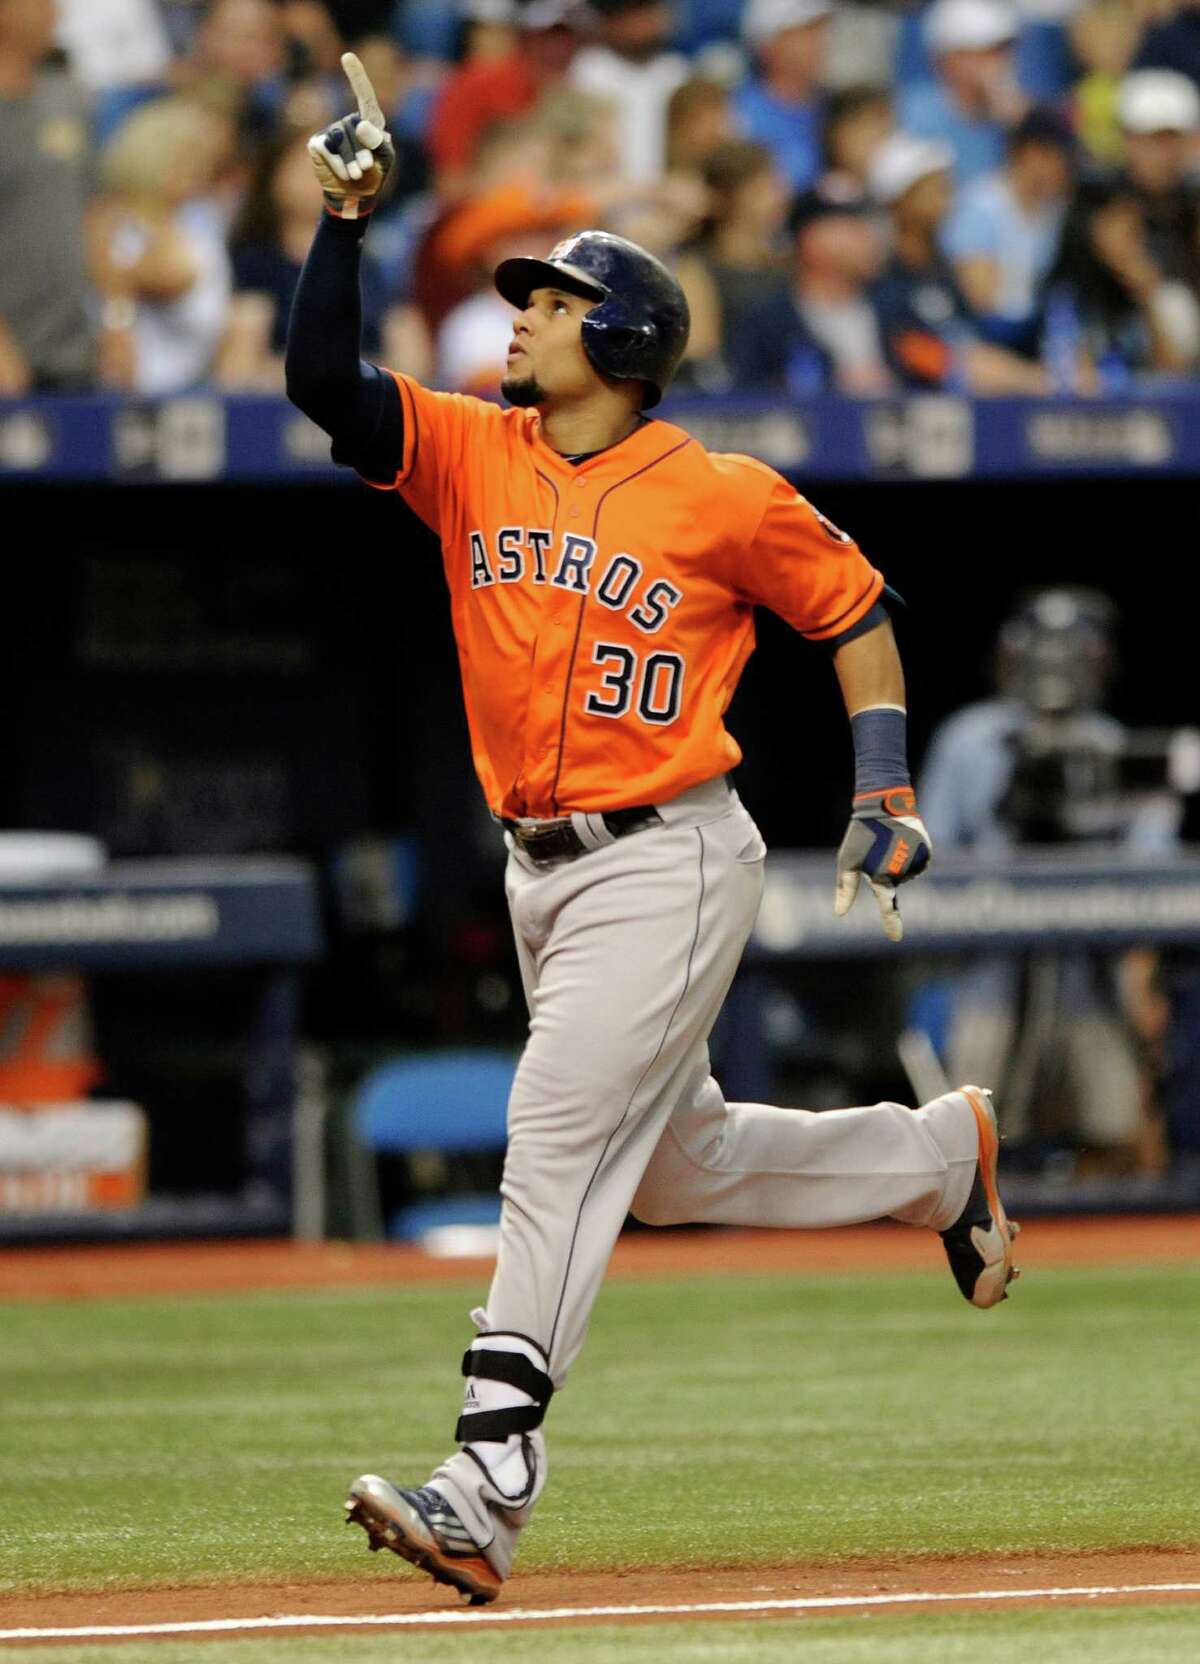 Houston Astros' Carlos Gomez (30) heads for home after hitting a solo home run off Tampa Bay Rays starter Chris Archer during the seventh inning of a baseball game, Saturday, June 11, 2016, in St. Petersburg, Fla. (AP Photo/Steve Nesius)